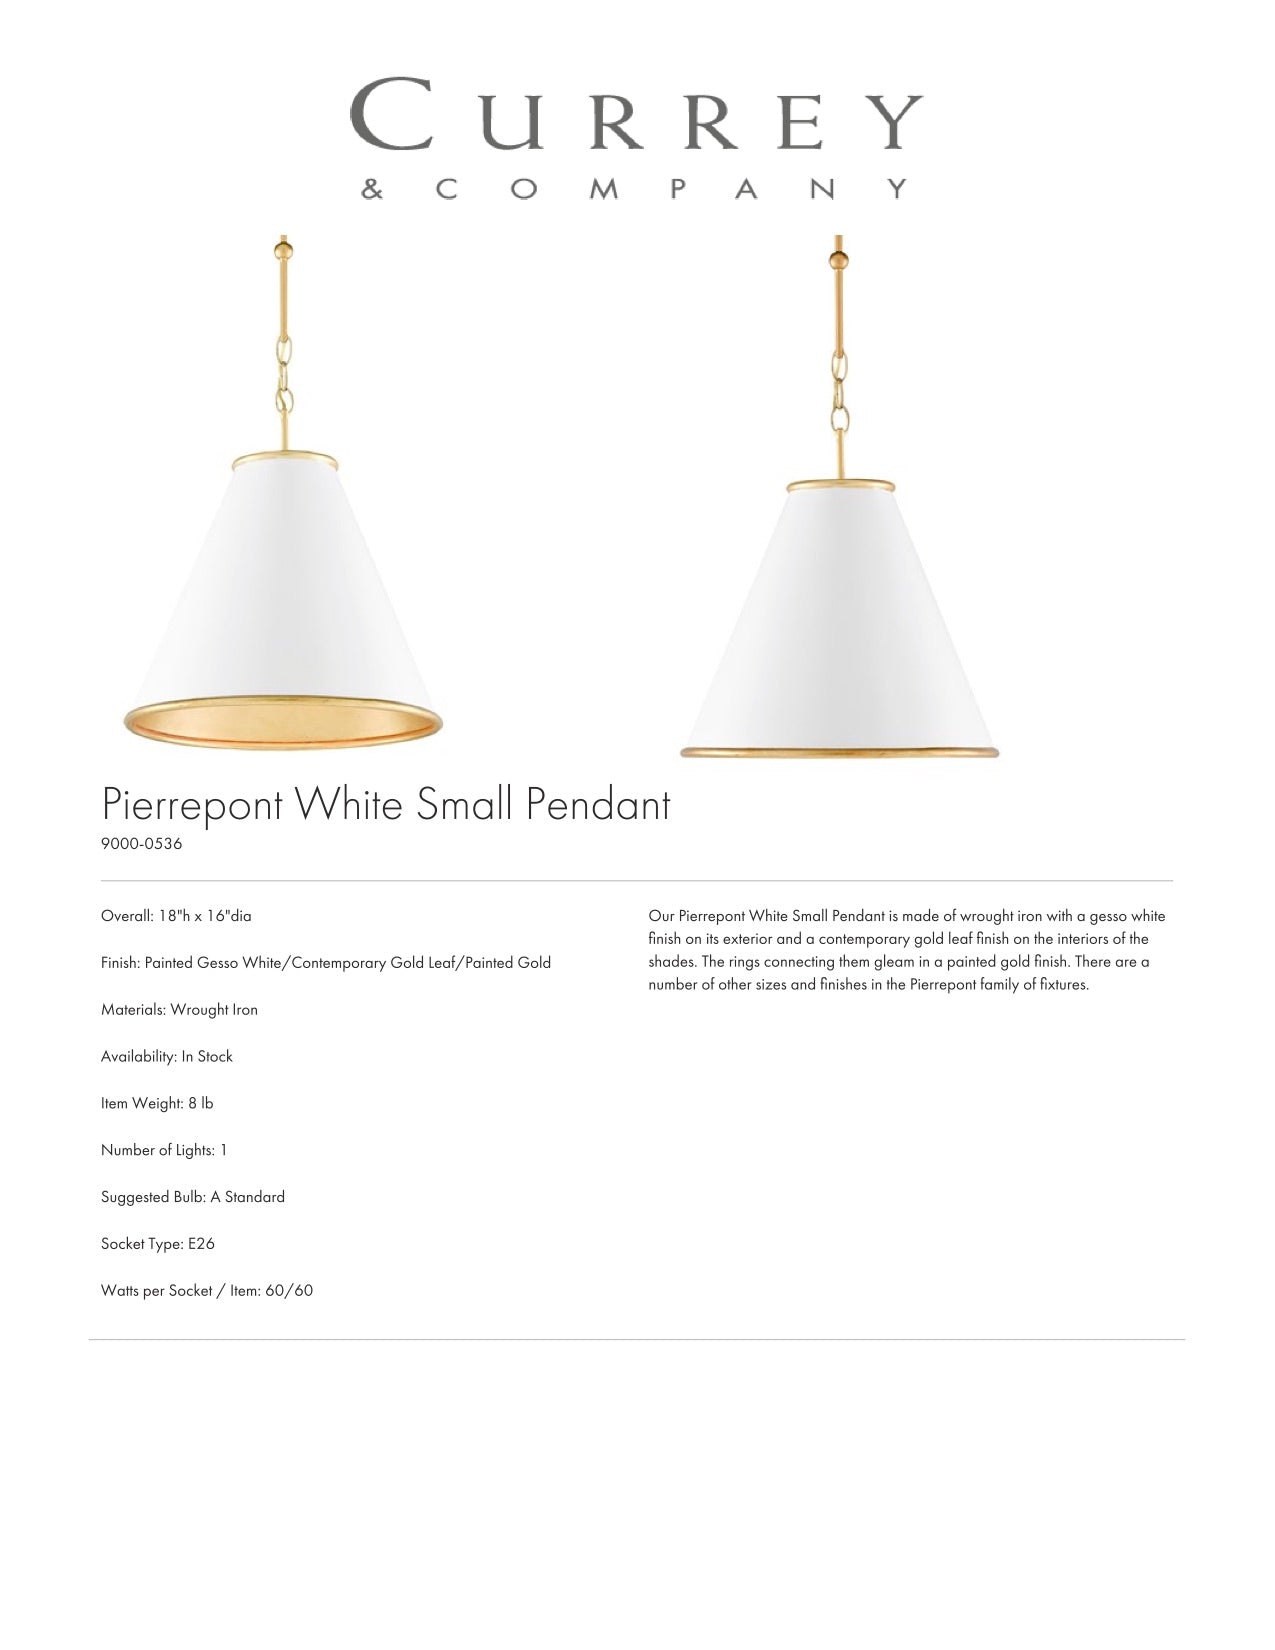 Currey & Company Pierrepont White Small Pendant Tearsheet